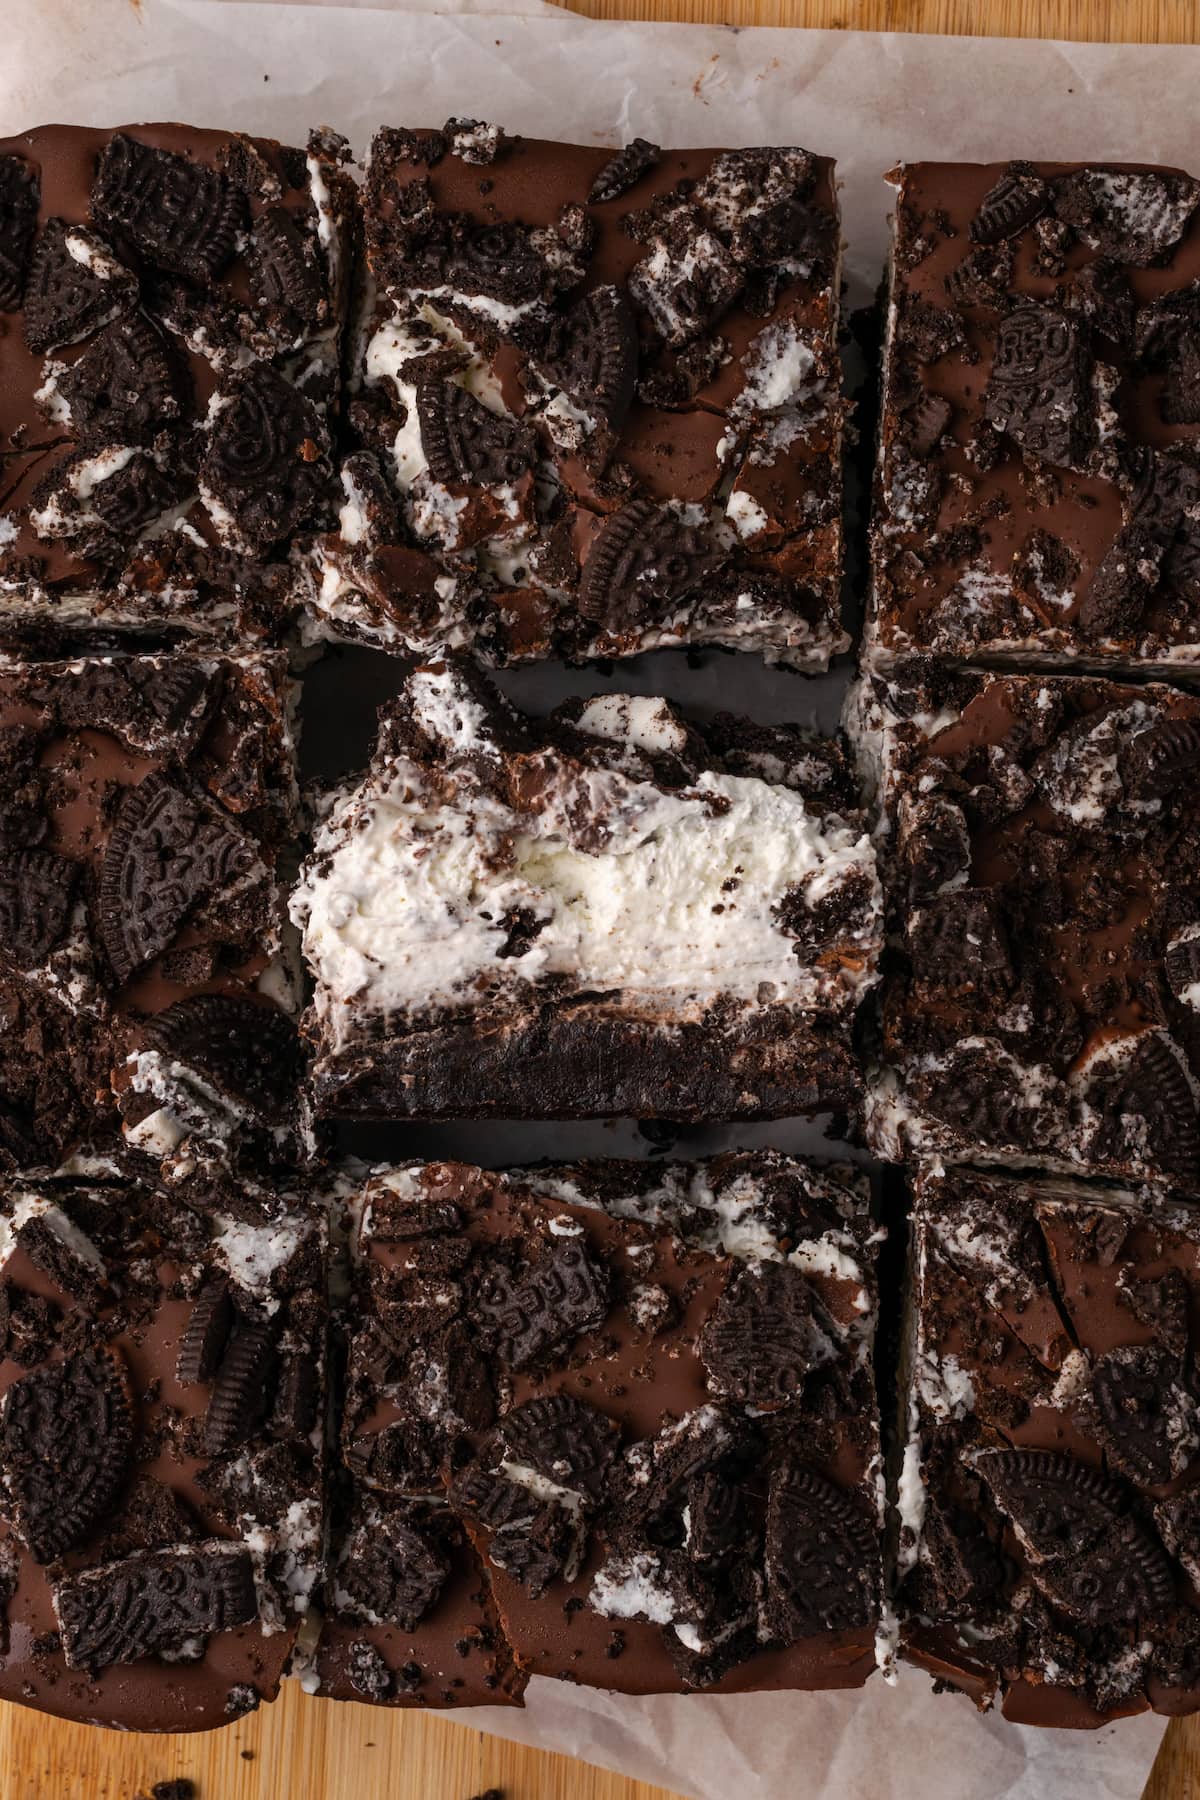 Oreo brownies cut into squares, with one brownie turned on its side to reveal the frosting and chocolate layers.